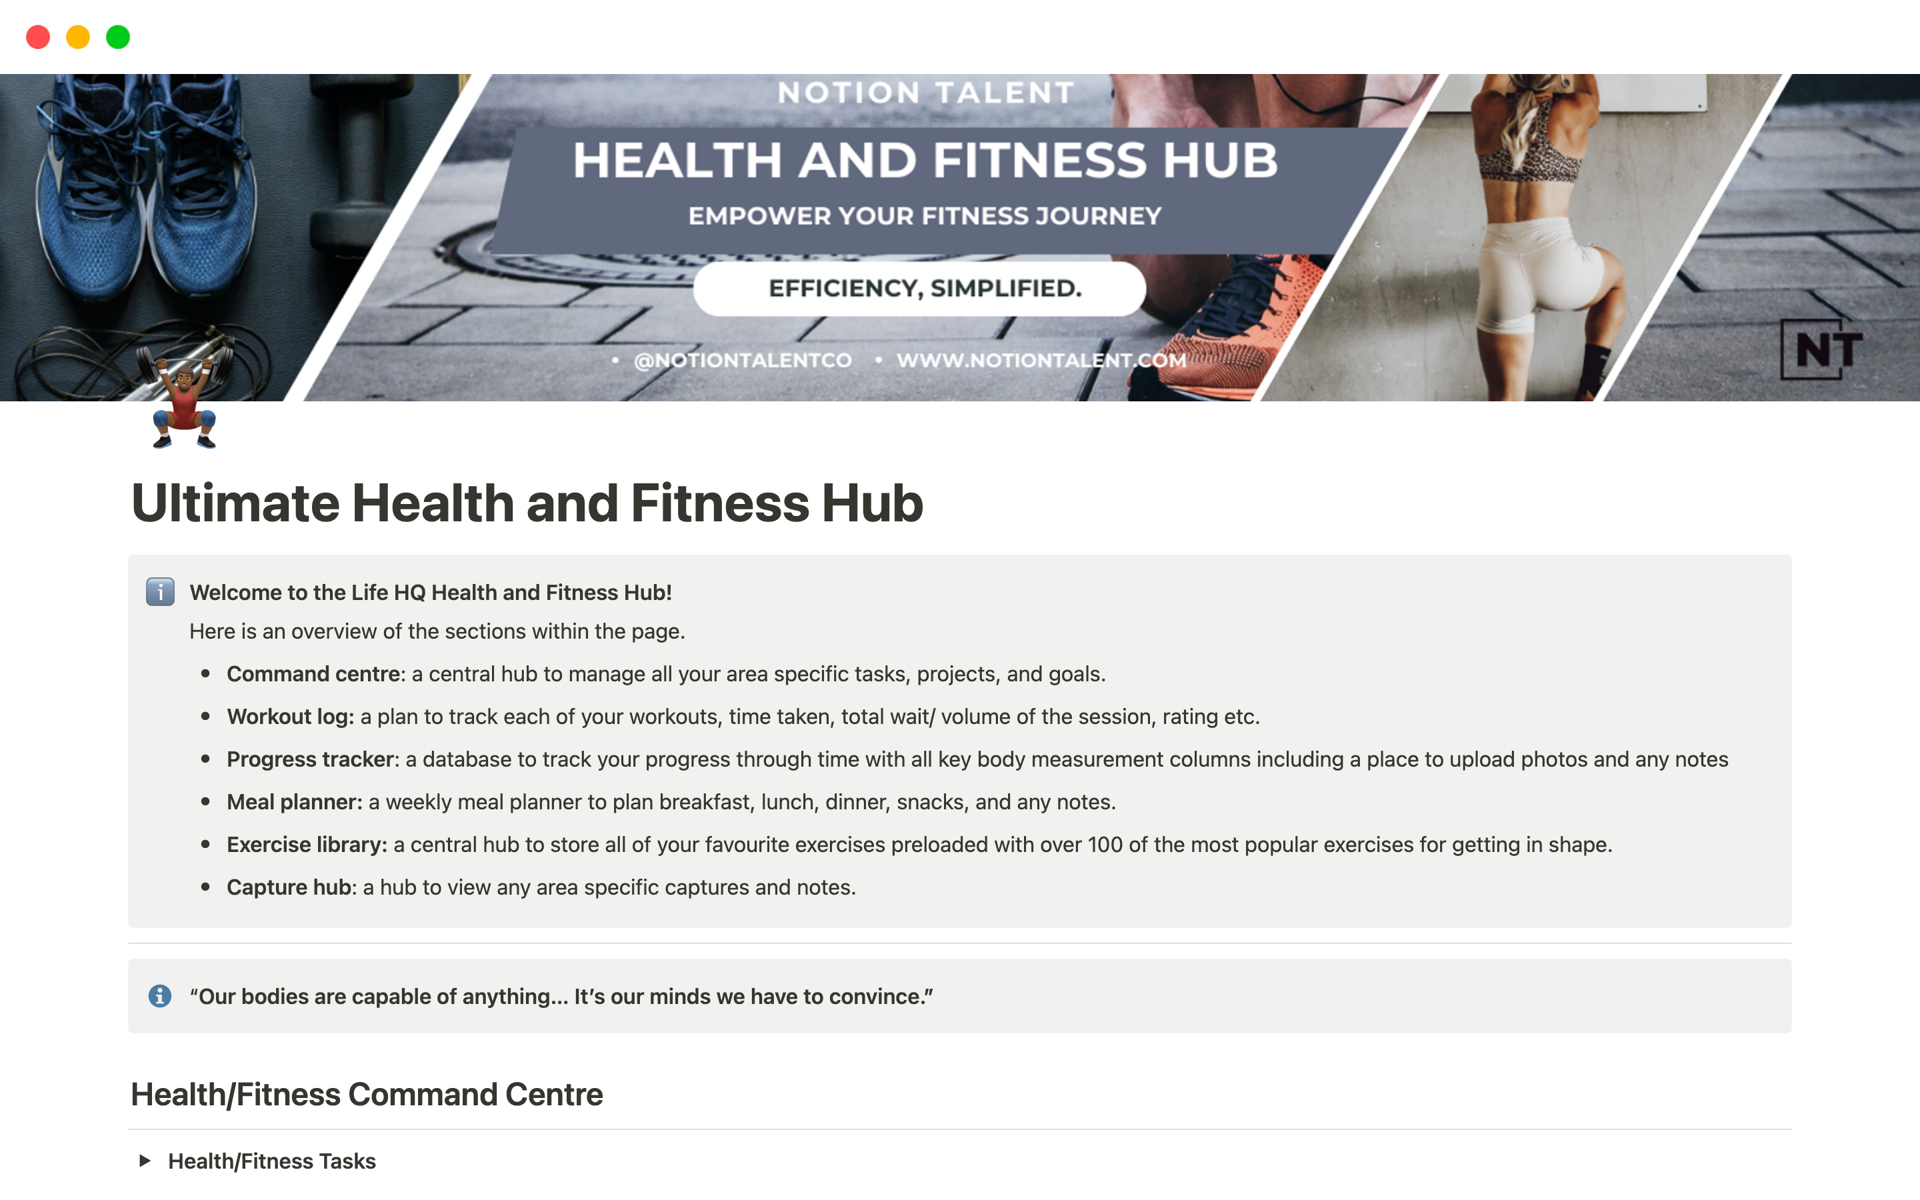 Elevate your health and fitness journey with the Ultimate Health and Fitness Hub, a comprehensive Notion template for tracking workouts, meals, and progress. Achieve your wellness goals with an organized, easy-to-use digital health companion.